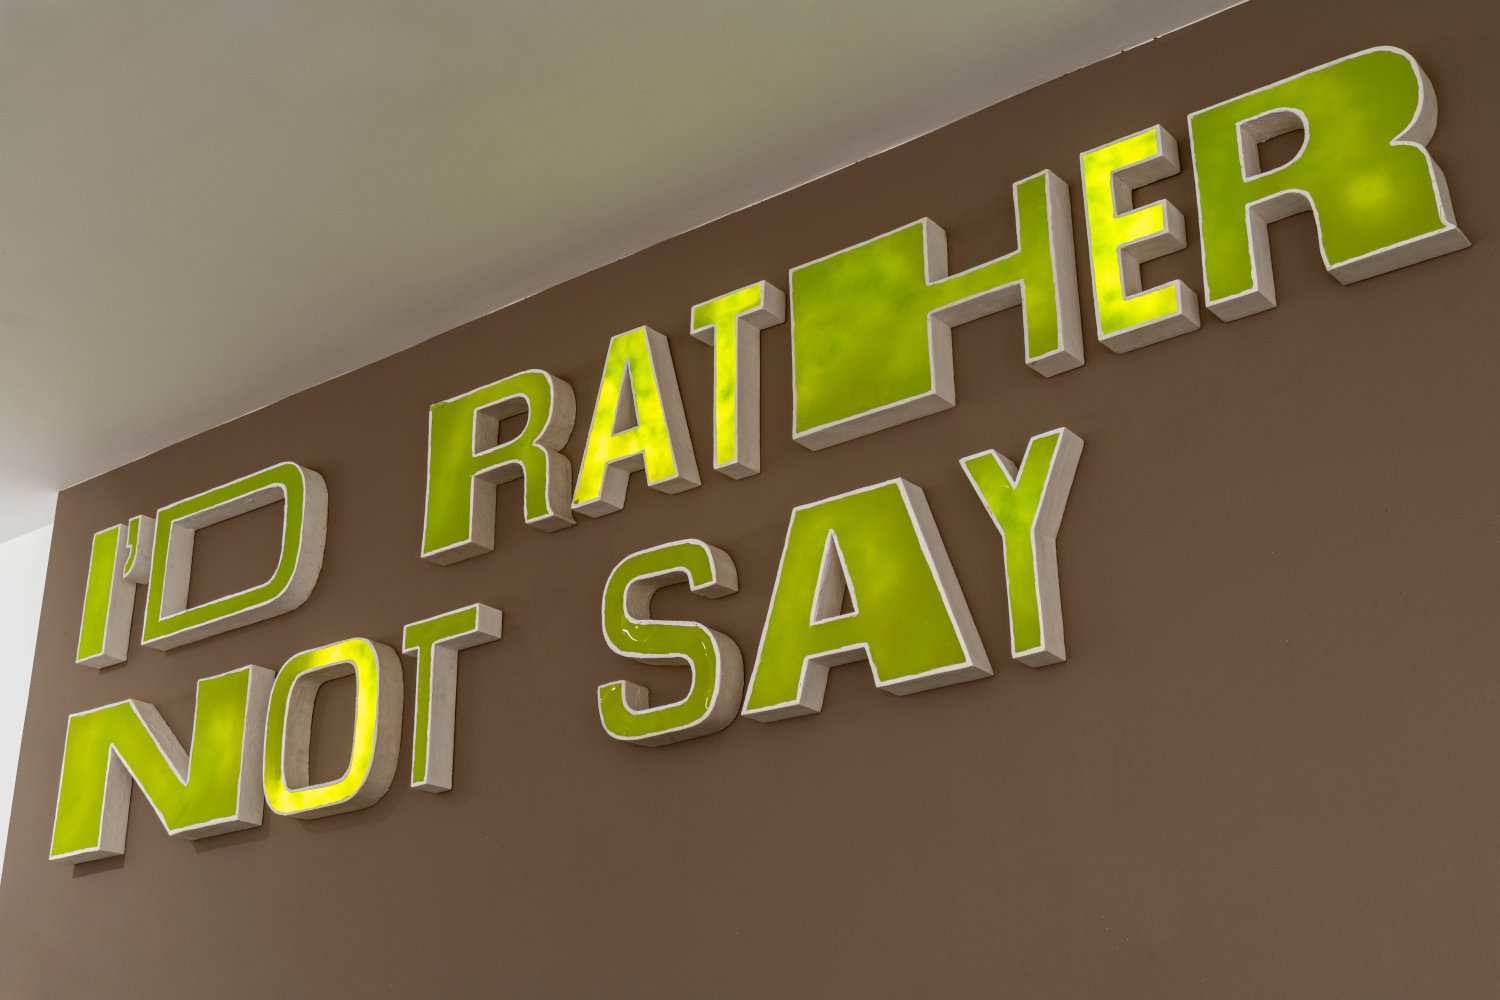 Sayer Delk artwork of letters on a wall saying "I'd rather not say"